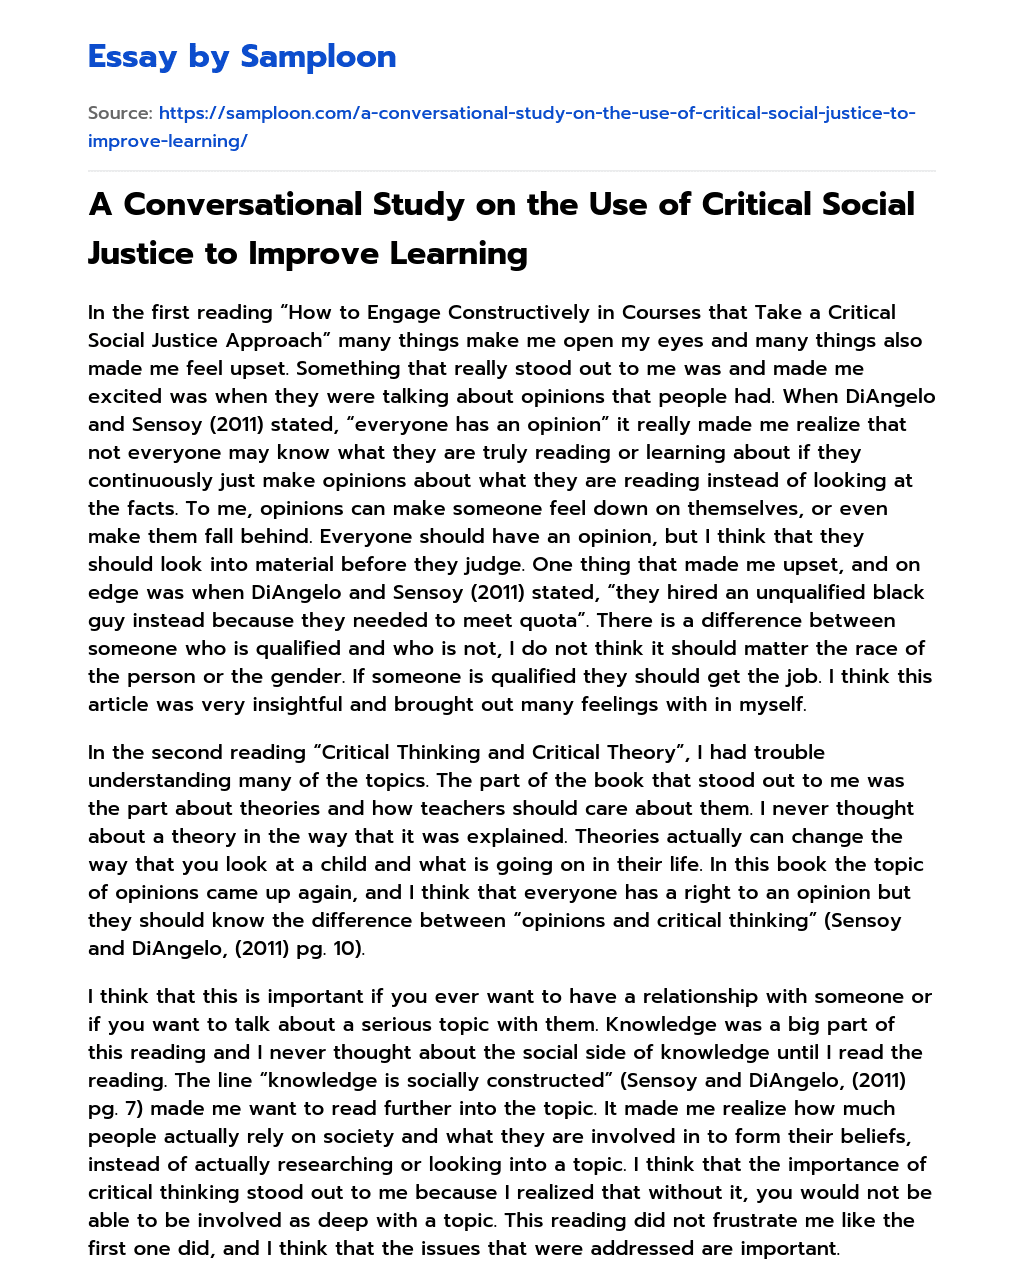 A Conversational Study on the Use of Critical Social Justice to Improve Learning essay